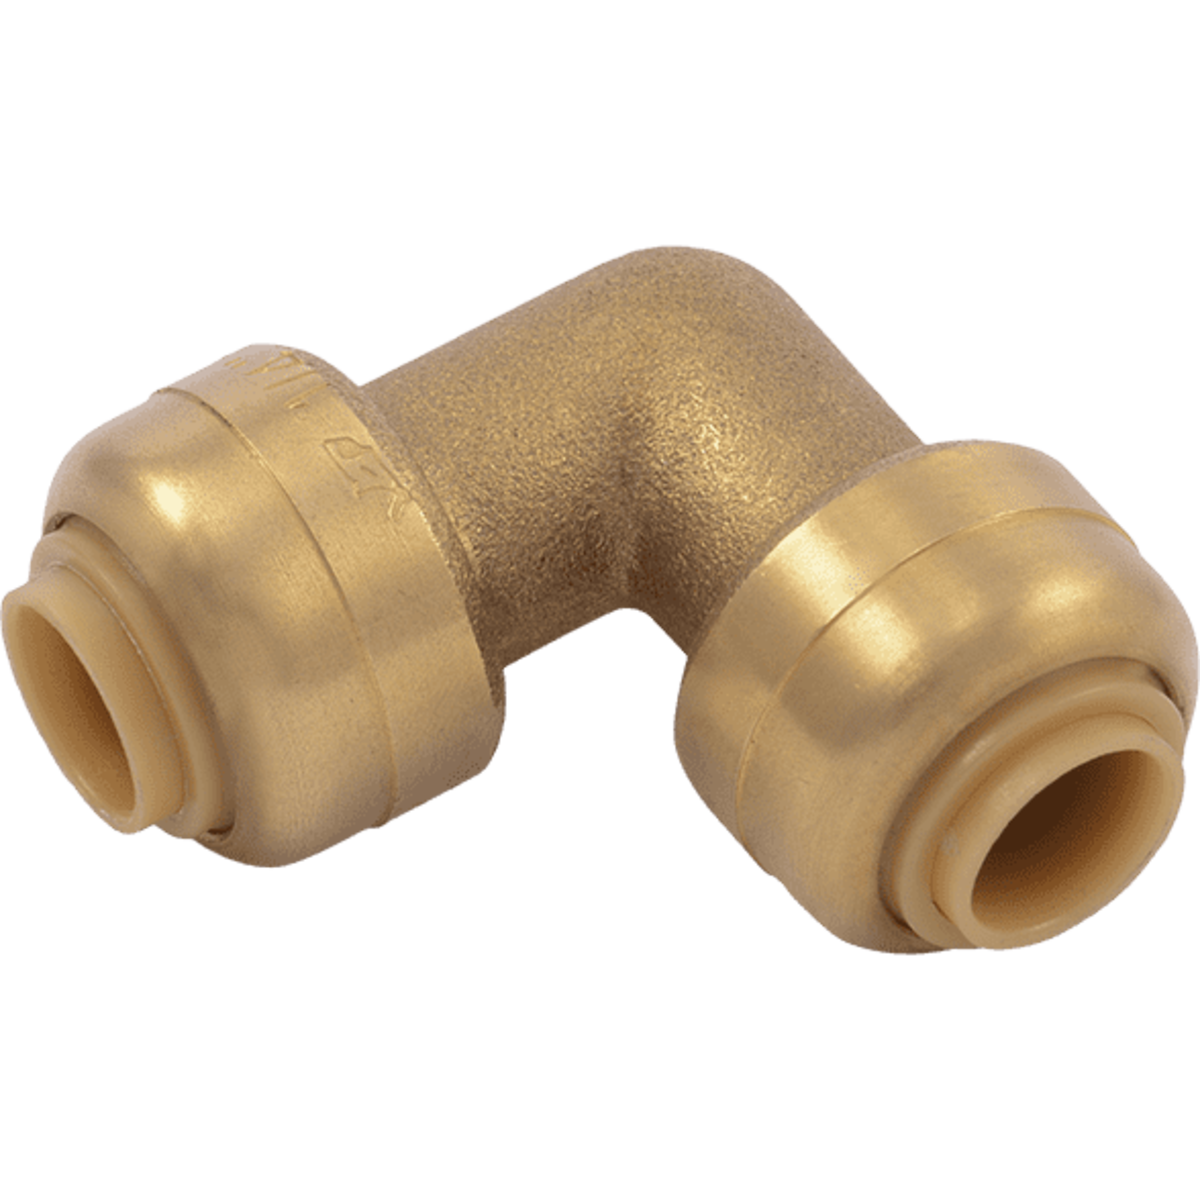 Brass Olives Plumbing 22mm Compression Pack of 5 *Top Quality! Pipe fitting